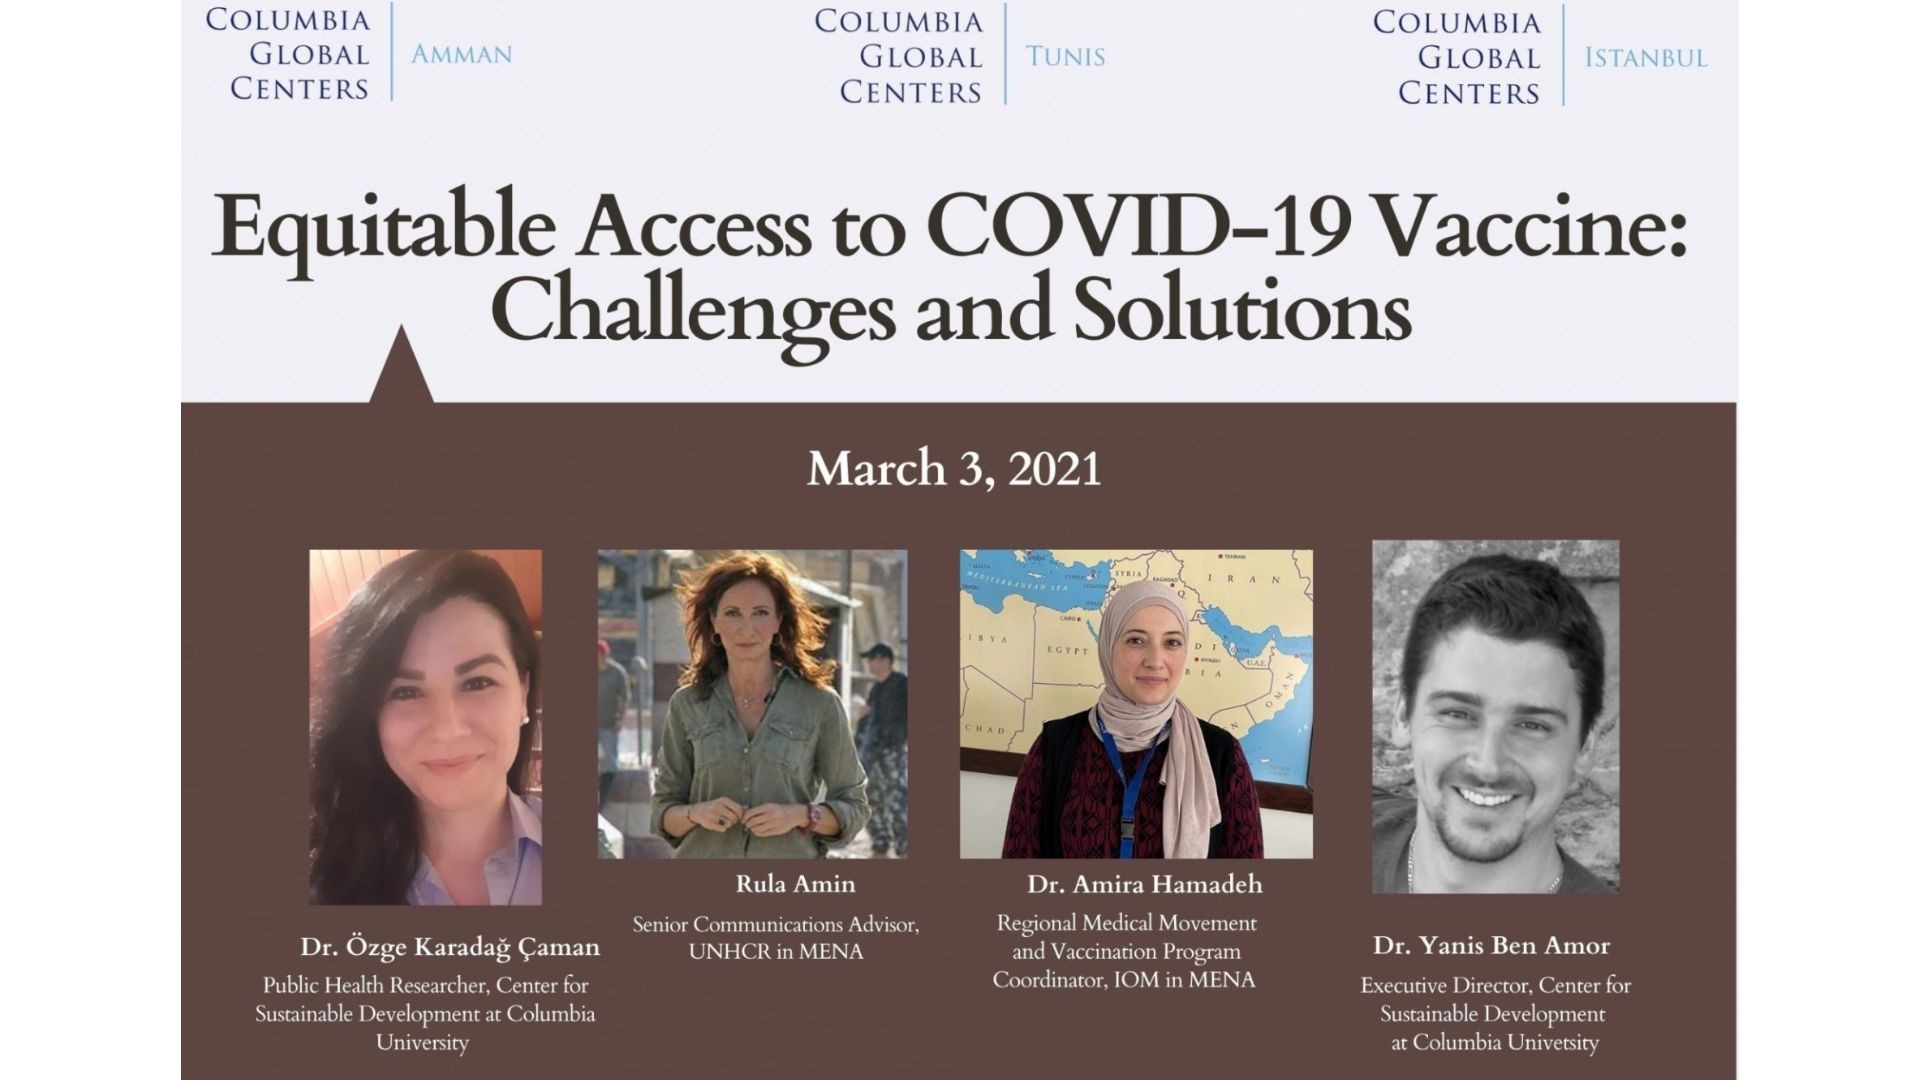 Equitable Access to COVID-19 Vaccine